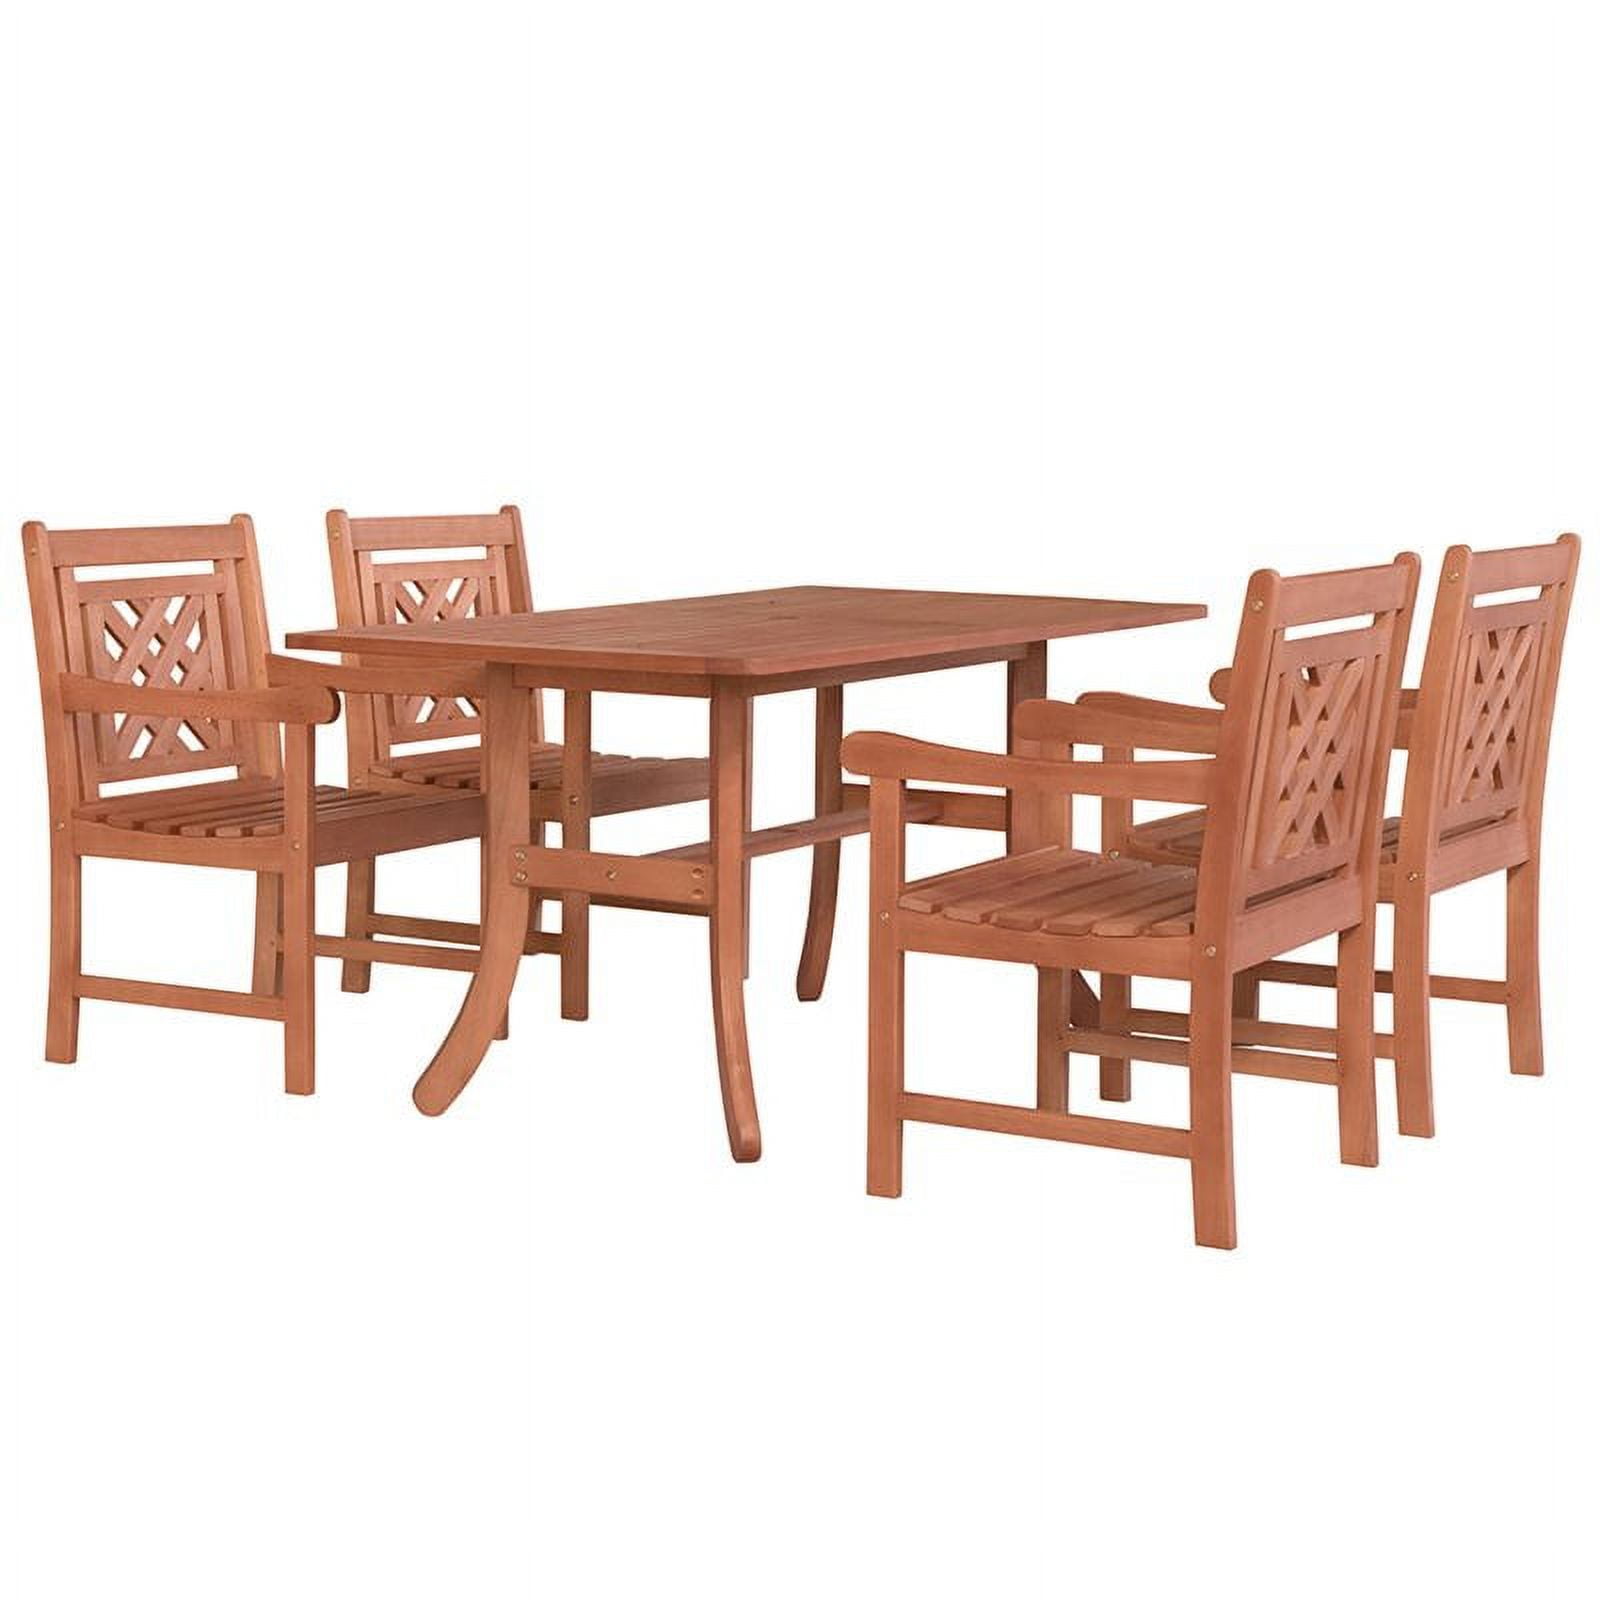 V189set45 Malibu Outdoor Wood Patio Curvy Legs Table Dining Set, Natural Wood - 34 X 22 X 24 In. - 5 Piece